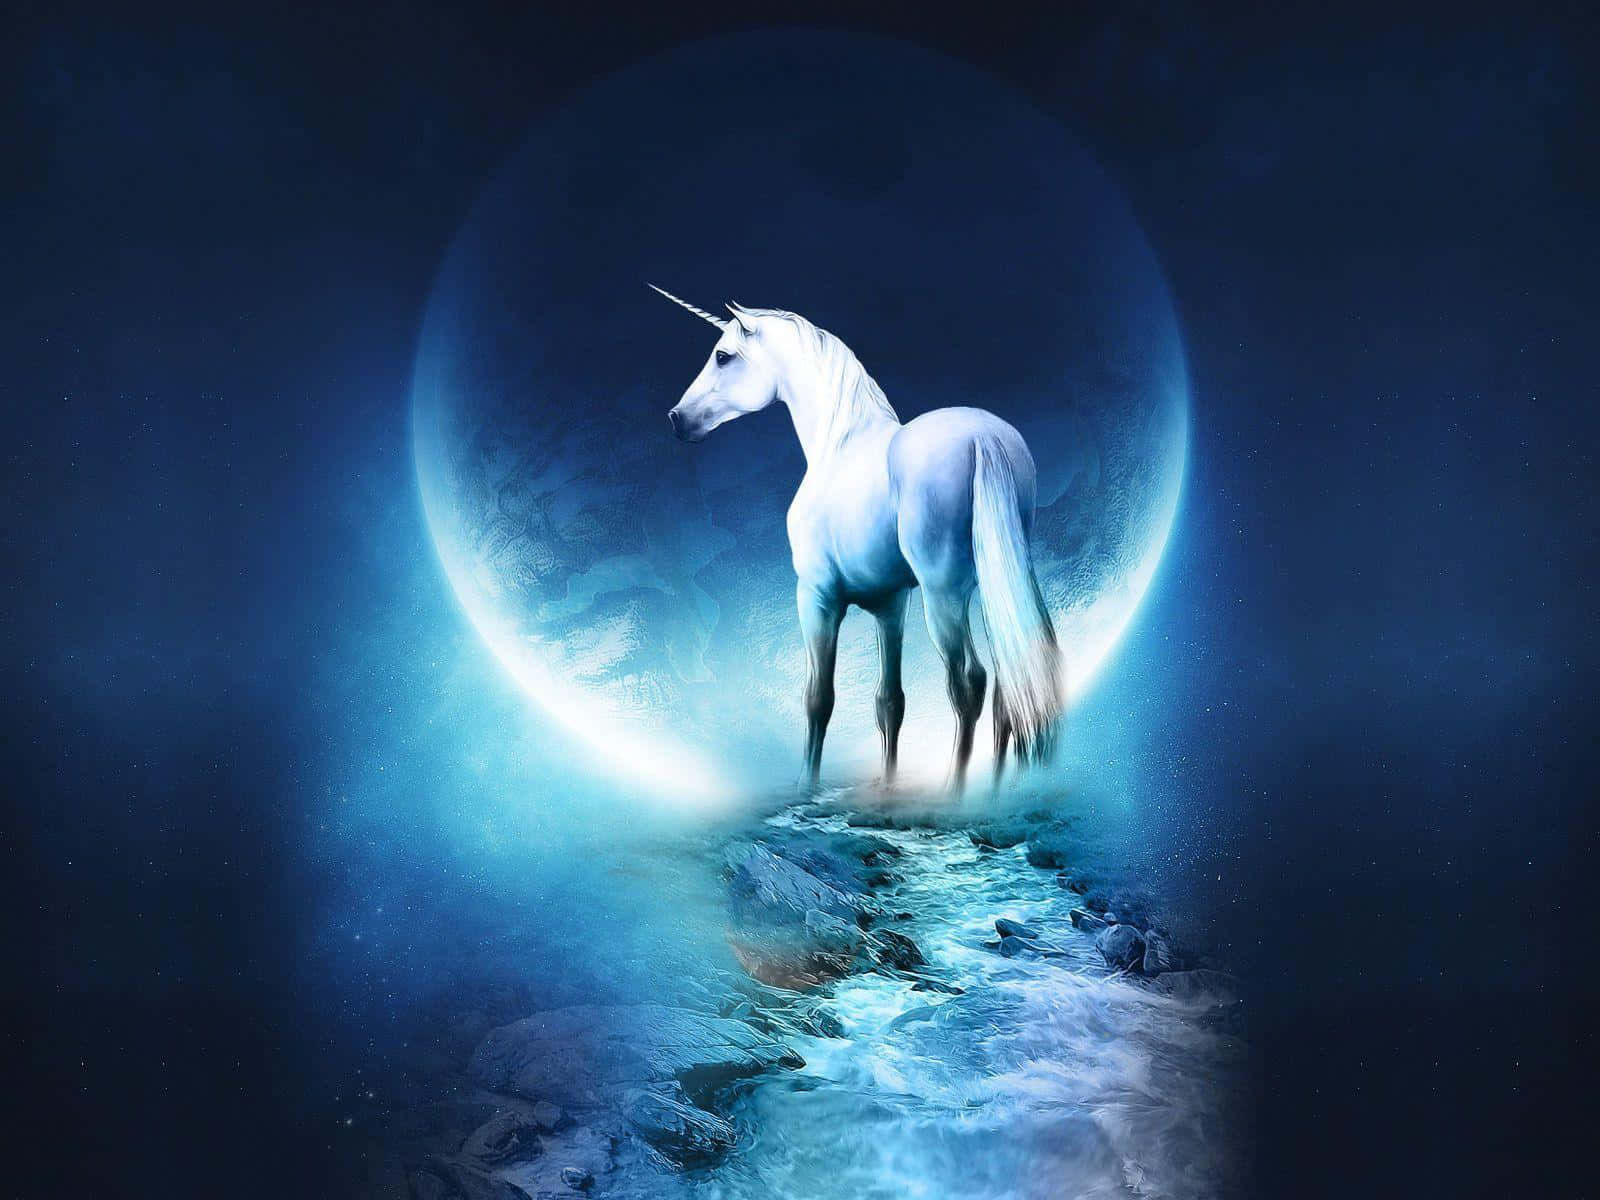 Mystical 3D Unicorn in a Magical Forest Wallpaper